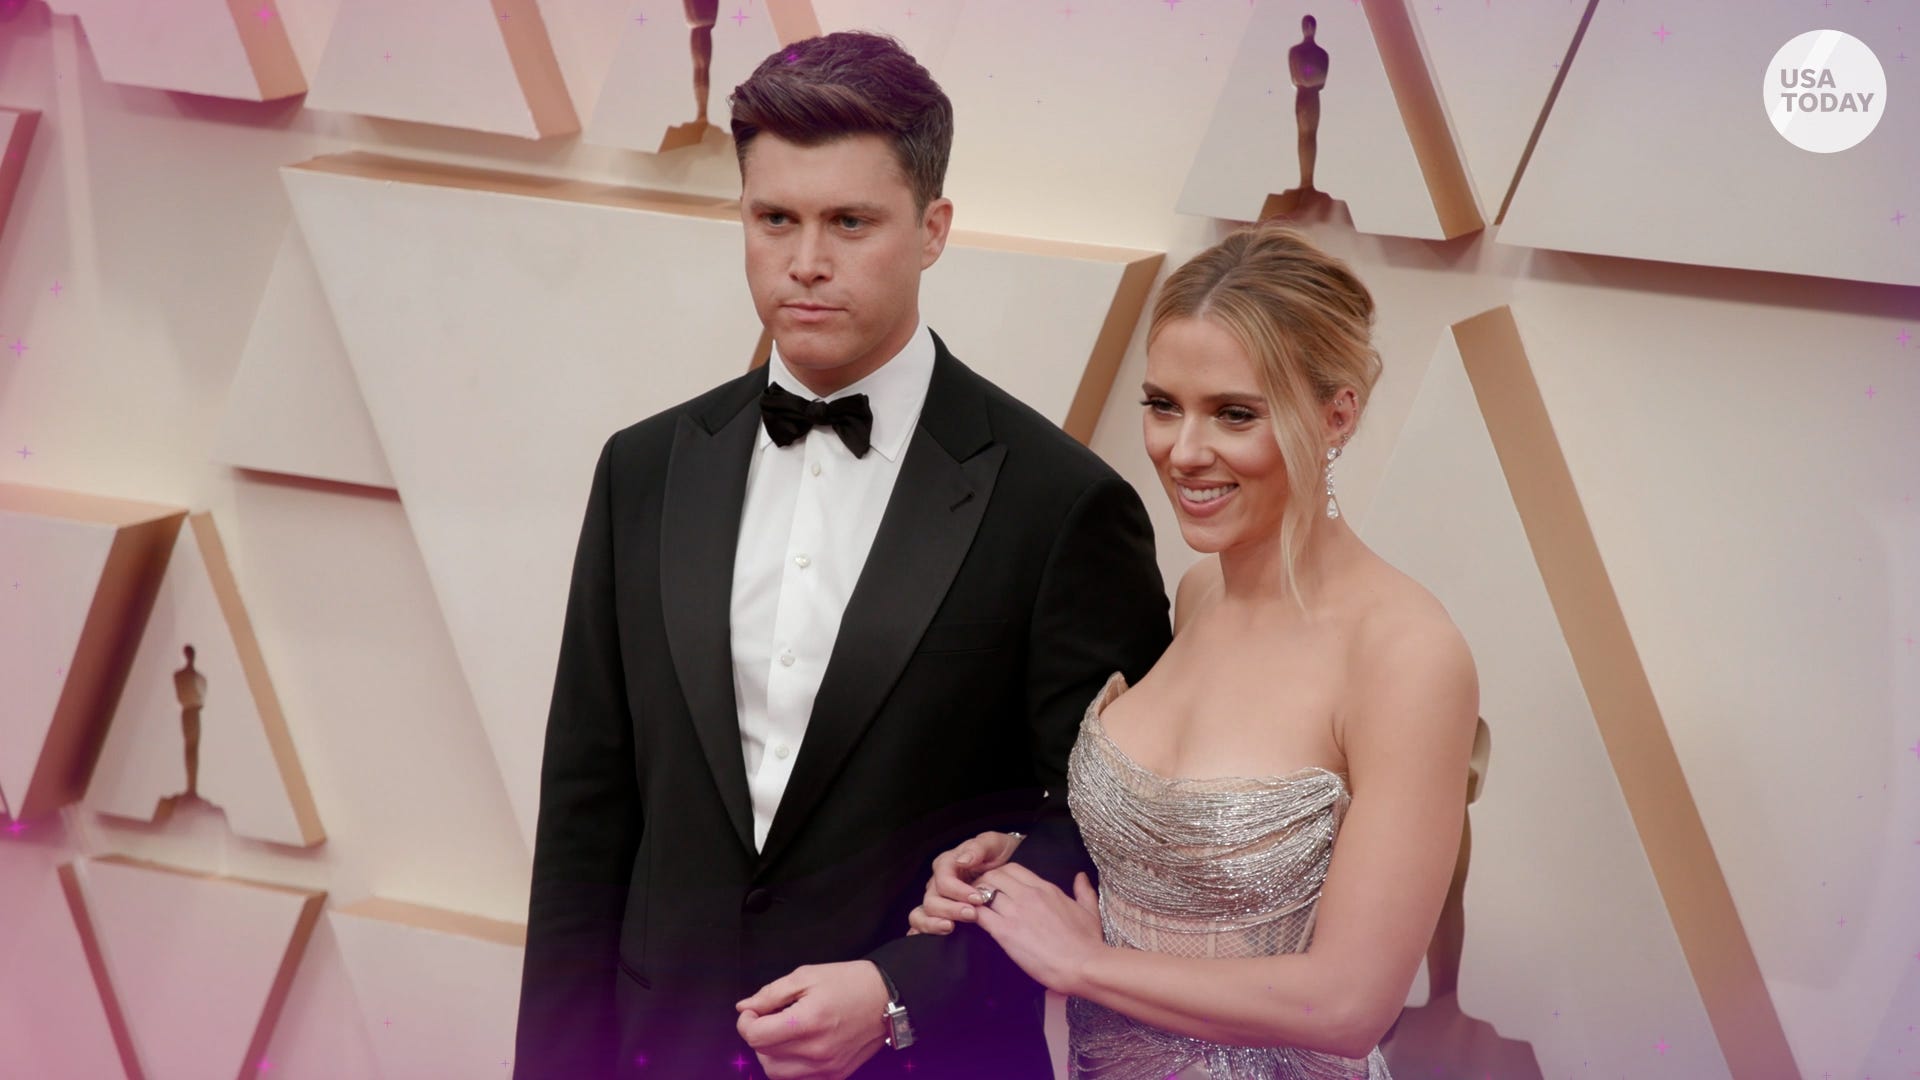 Scarlett Johansson and Colin Jost welcome baby boy: 'We love him very much' thumbnail